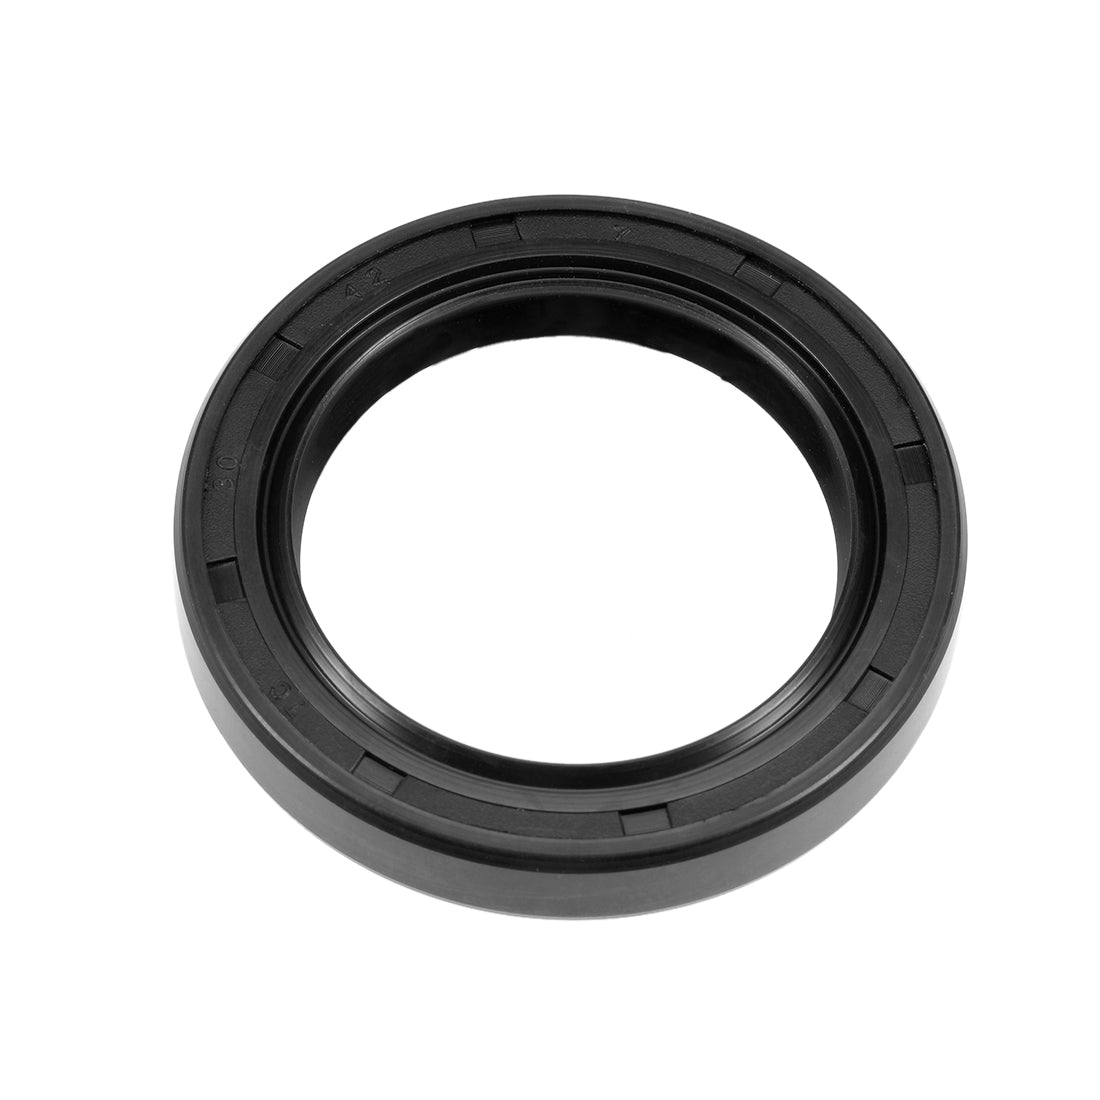 uxcell Uxcell Oil Seal, TC 30mm x 42mm x 7mm, Nitrile Rubber Cover Double Lip